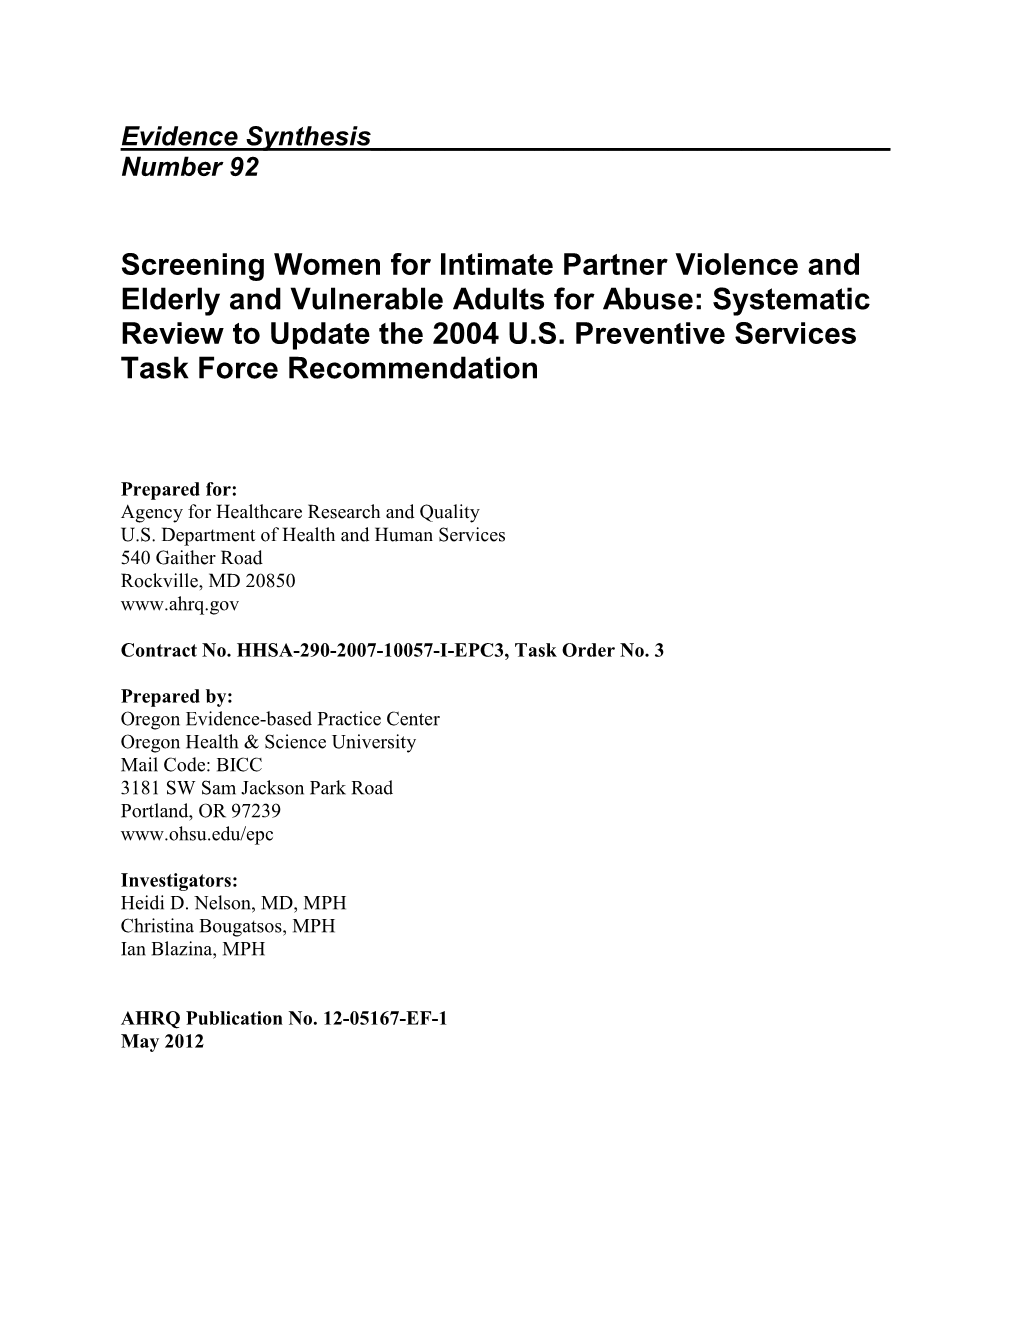 Screening Women for Intimate Partner Violence and Elderly and Vulnerable Adults for Abuse: Systematic Review to Update the 2004 U.S